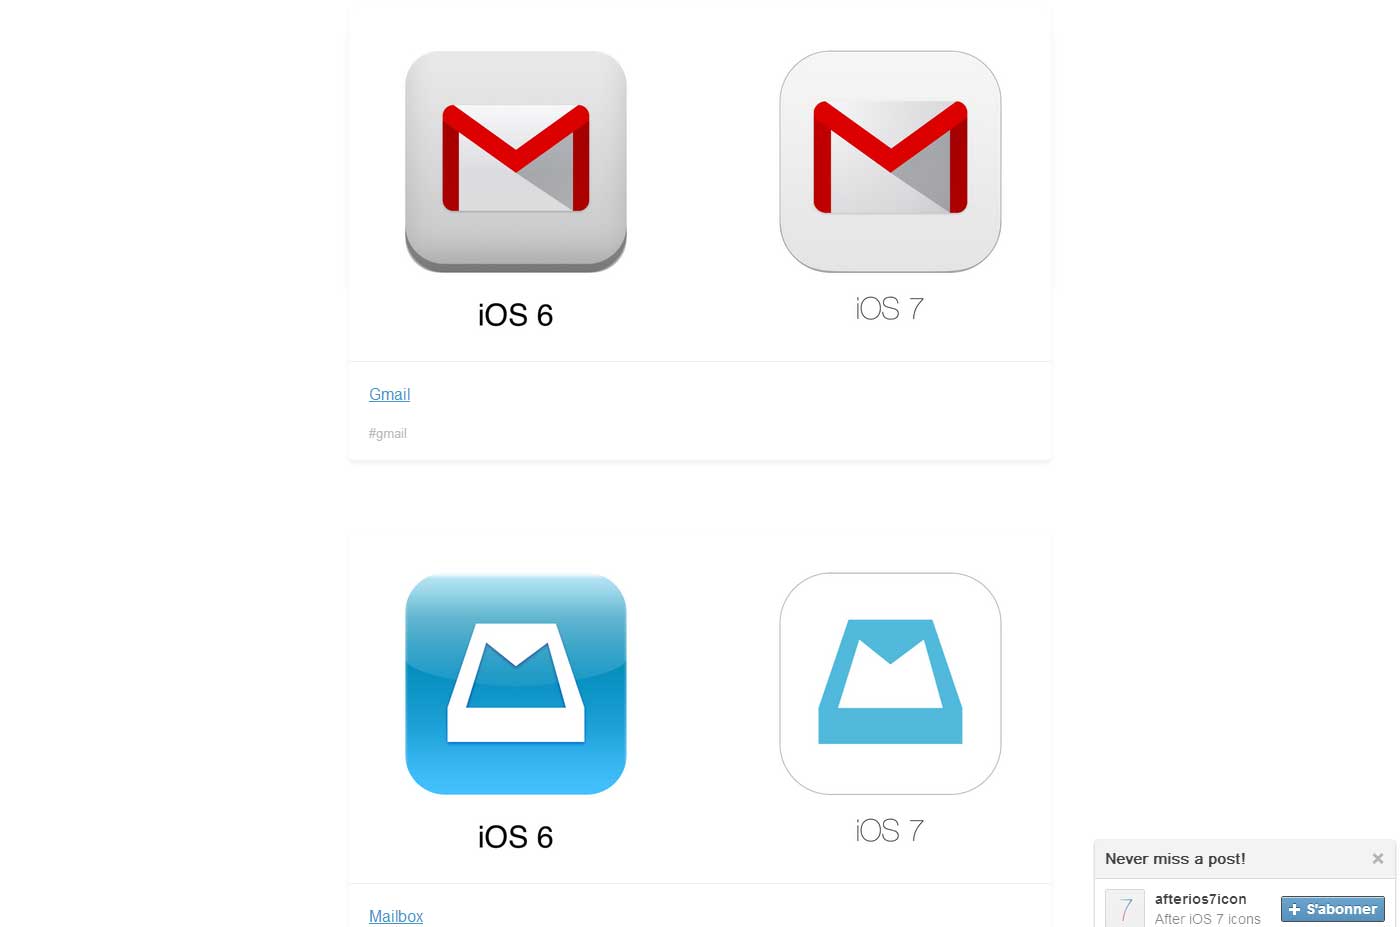 Showcase of iOS 6 apps icon redesigned for iOS 7 